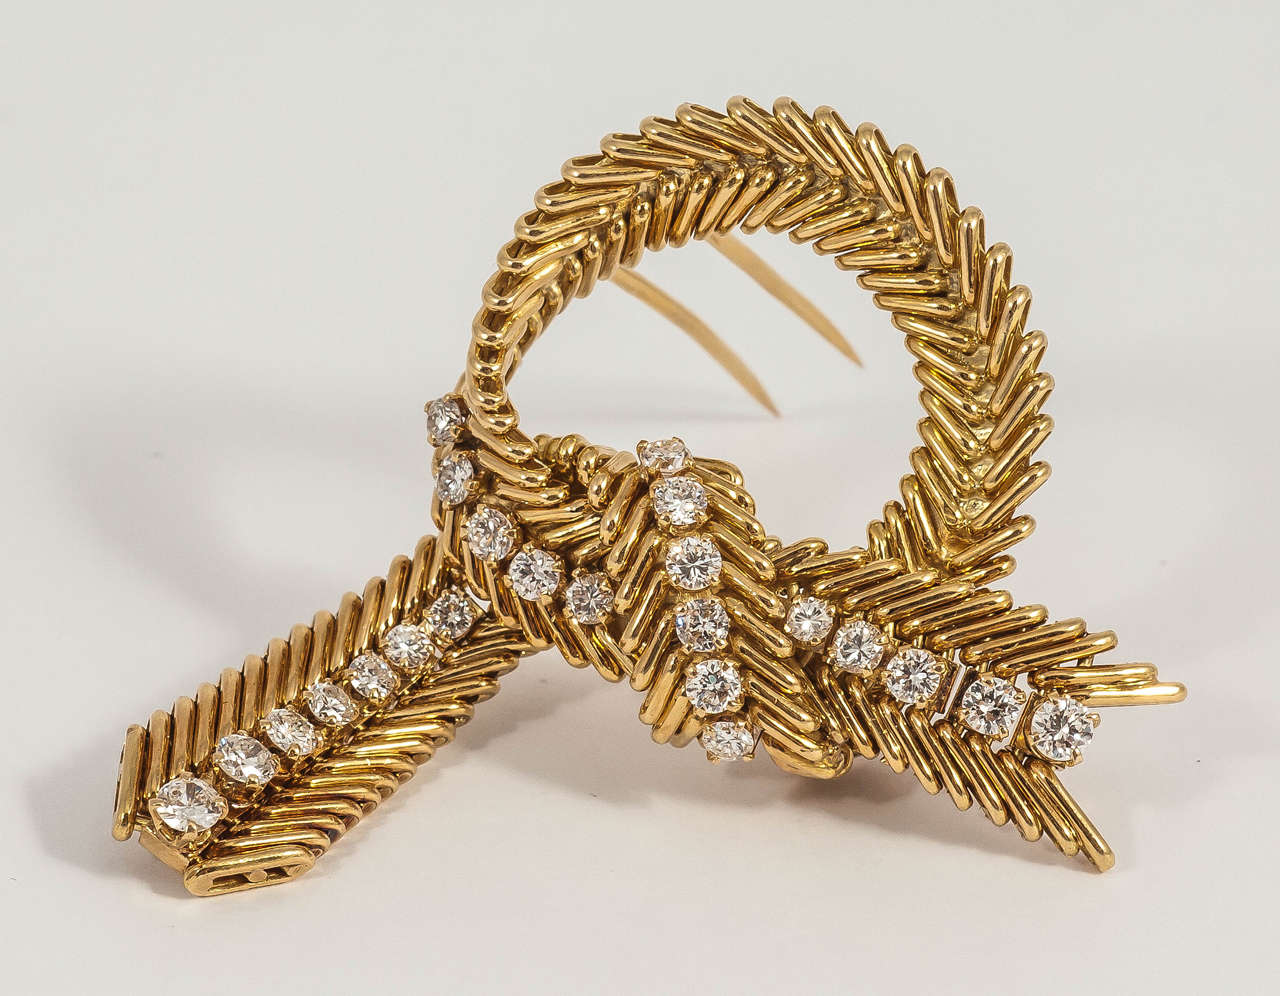 1960s Van Cleef & Arpels Diamond Gold Knot Pin In Excellent Condition For Sale In London, GB